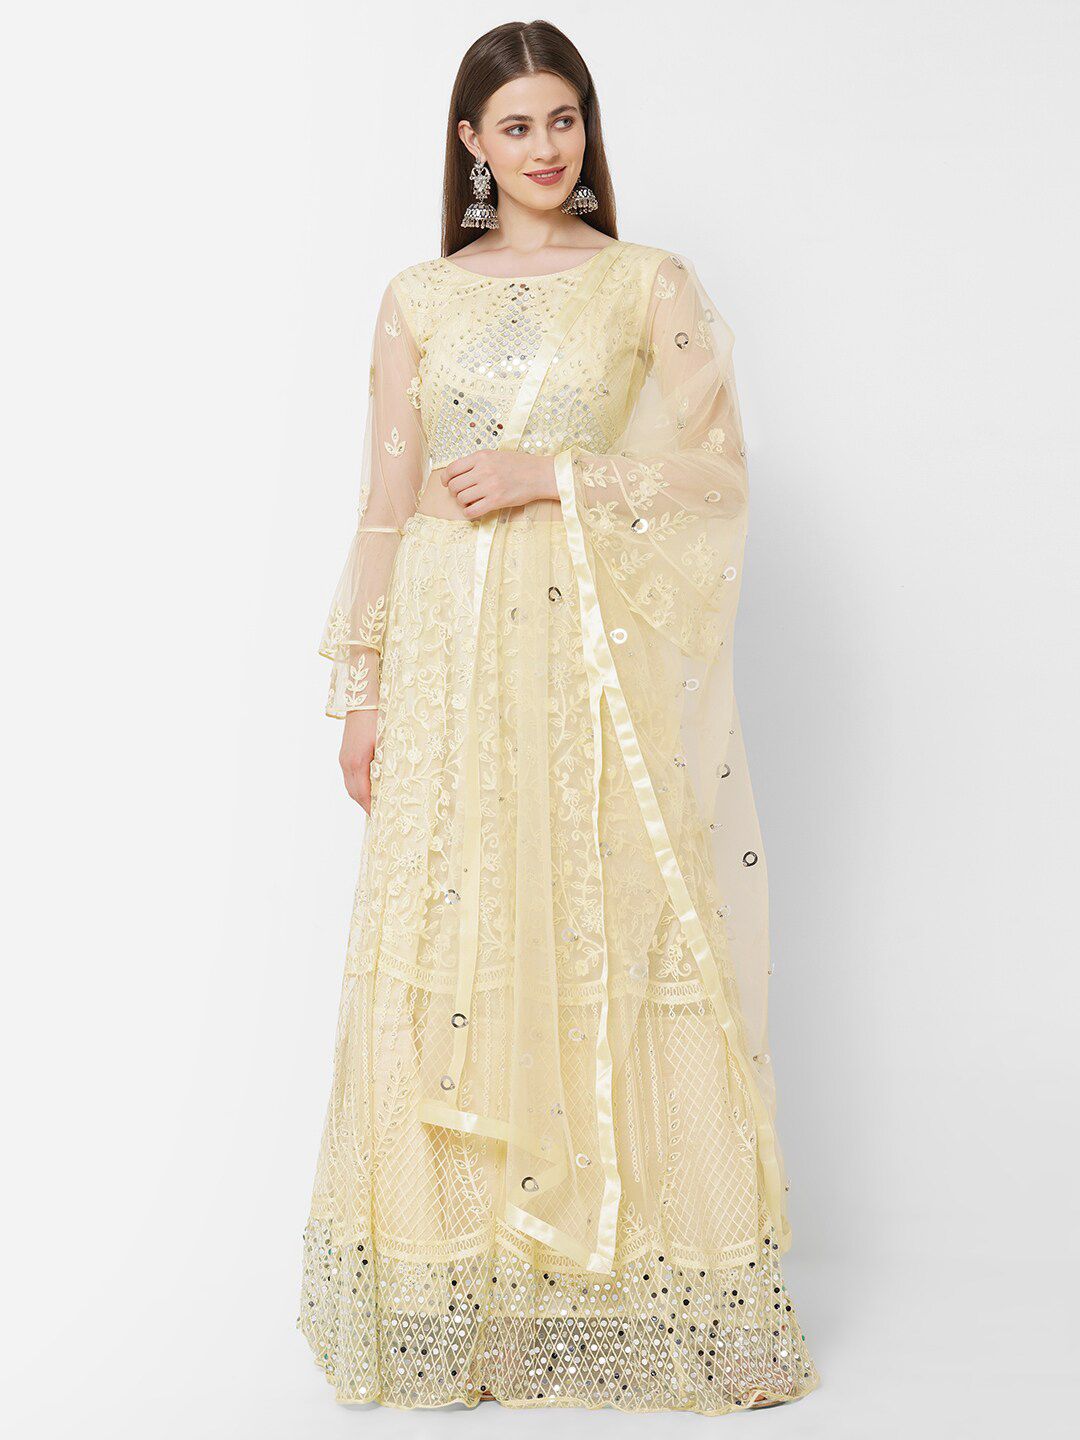 RedRound Yellow Embroidered Semi-Stitched Lehenga & Unstitched Blouse With Dupatta Price in India